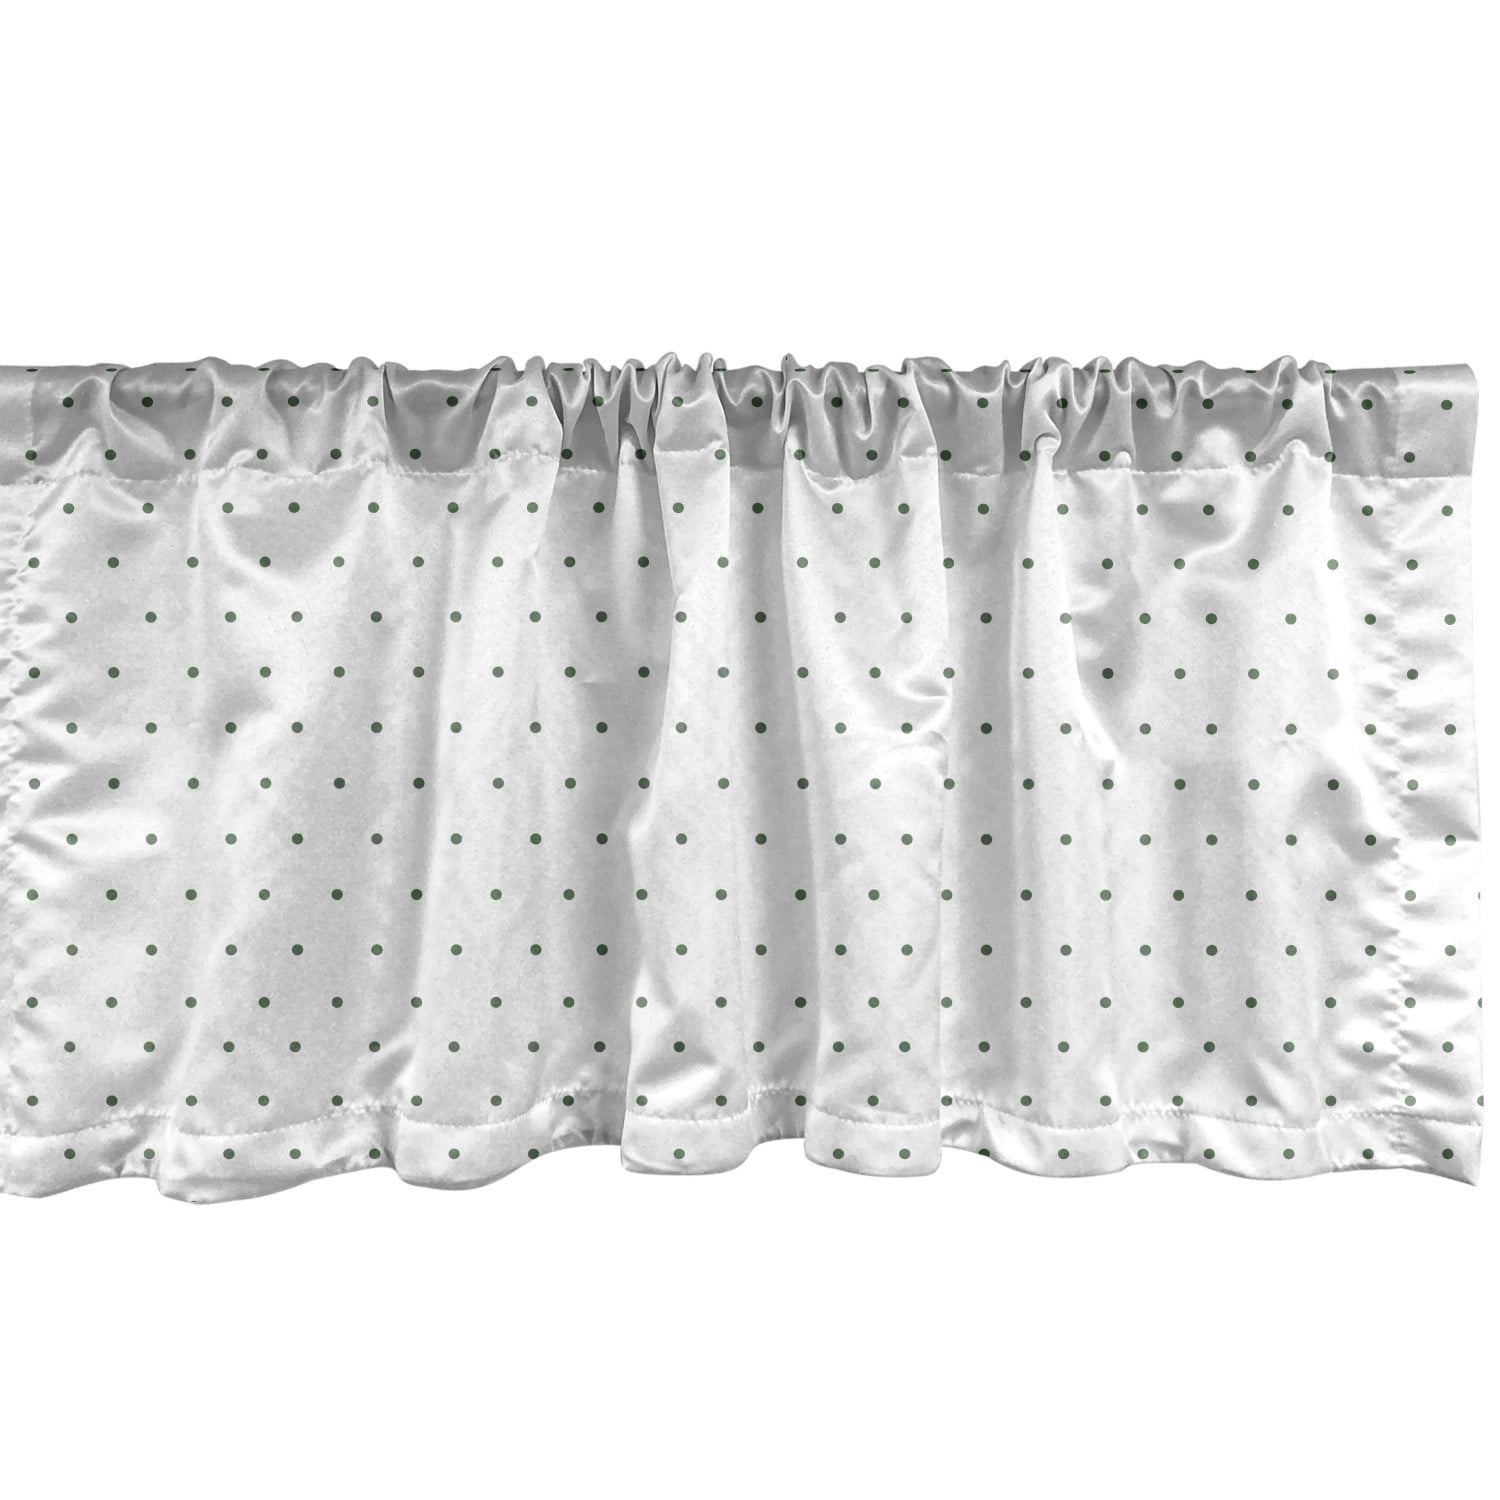 White Window Valance Pack of 2, Minimalistic Pattern with Small Polka ...